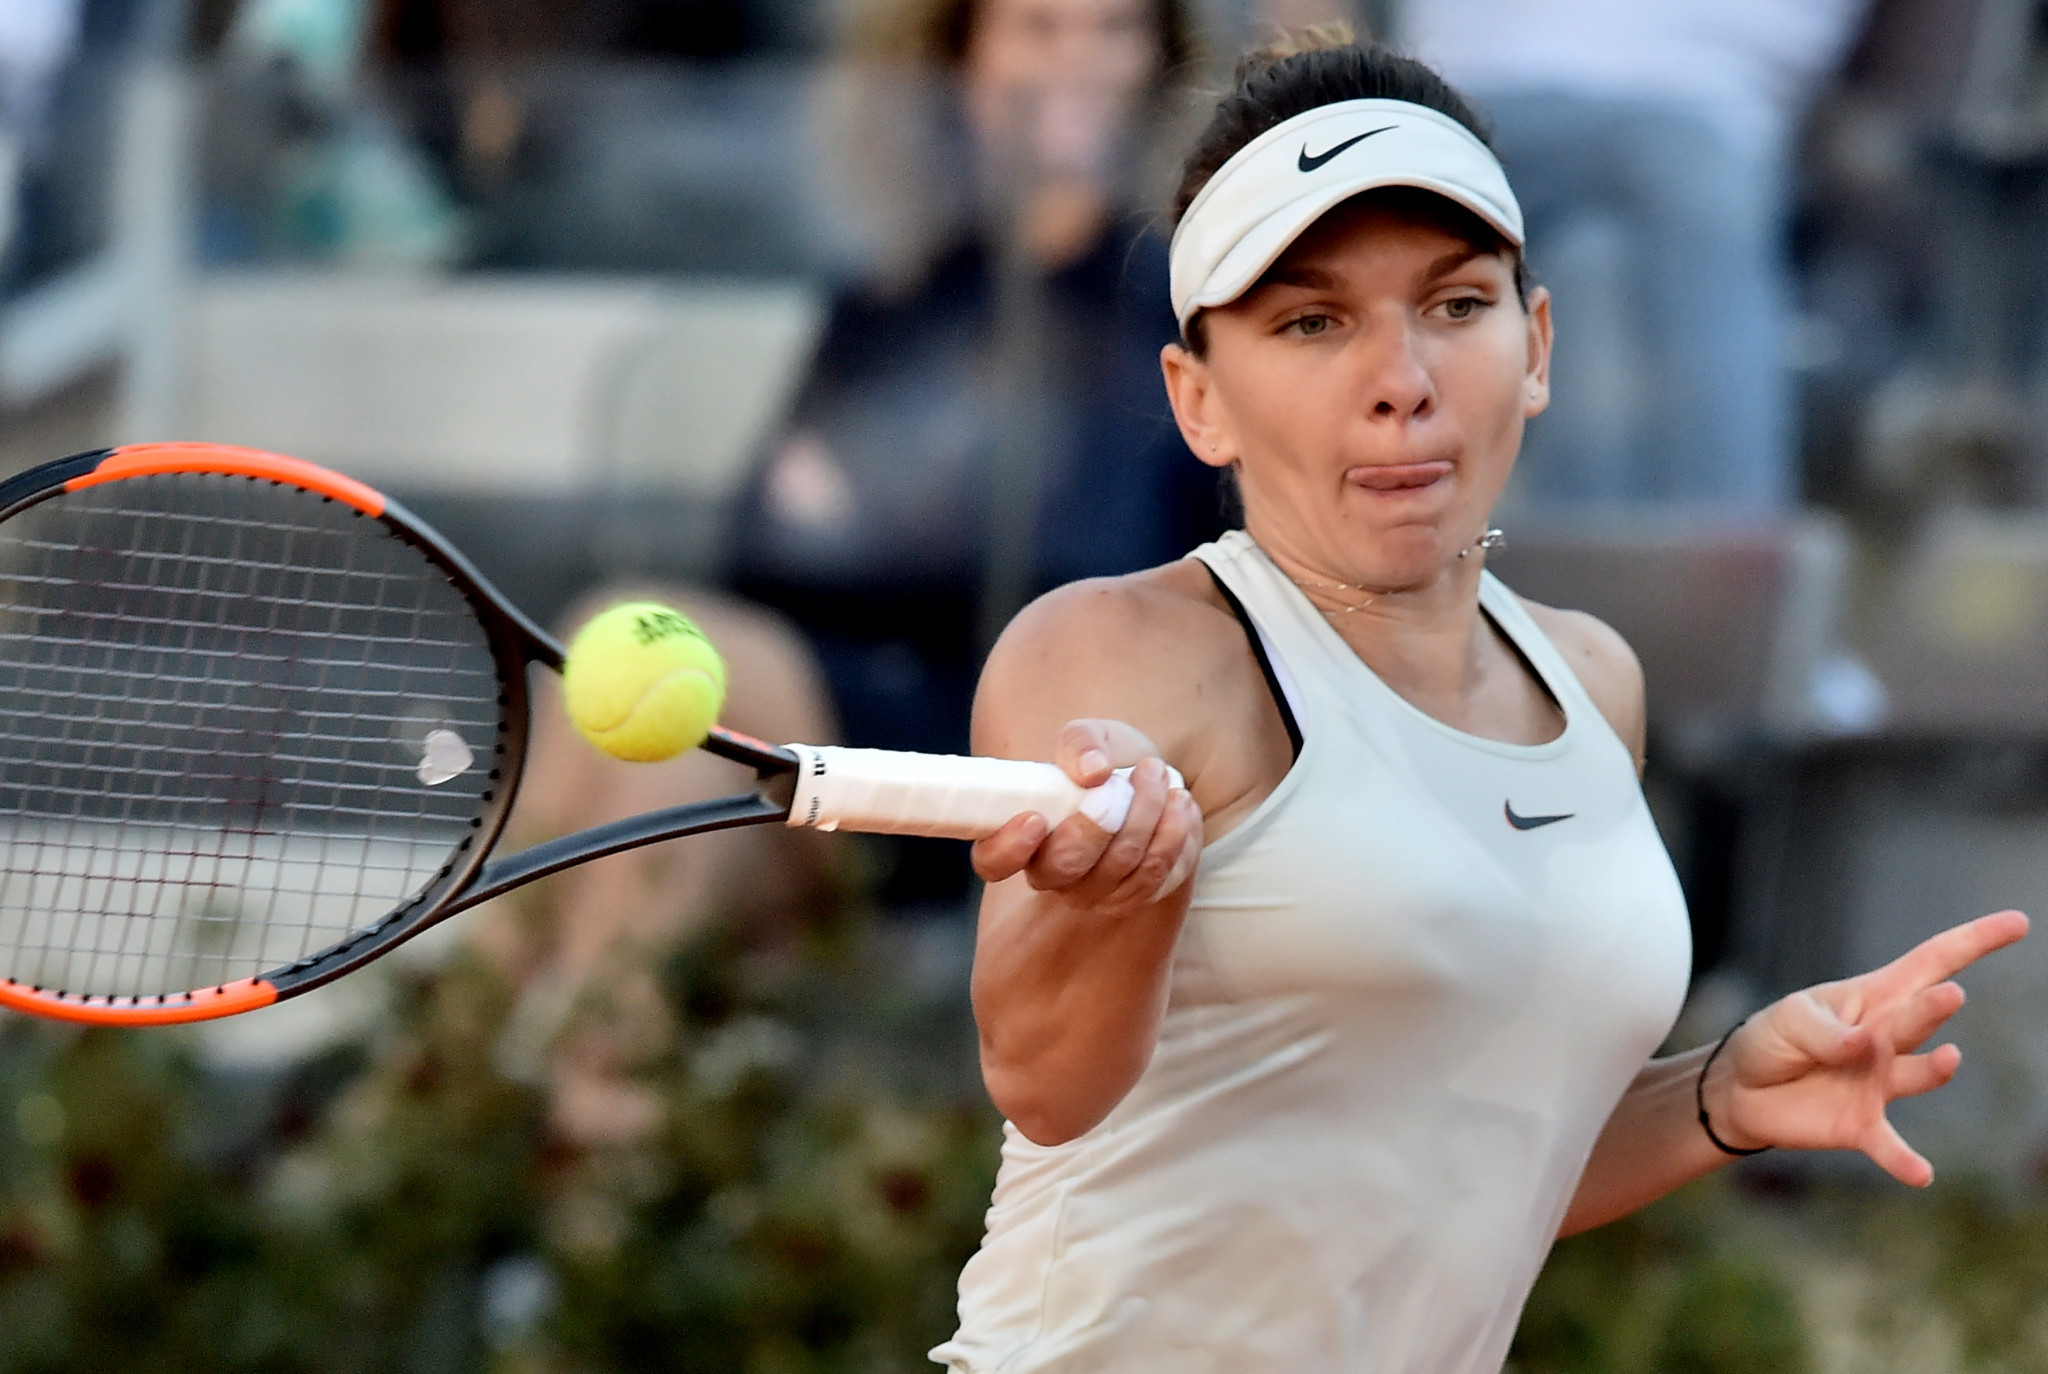 Simona Halep came from behind to beat Maria Sharapova to reach the final ©Getty Images